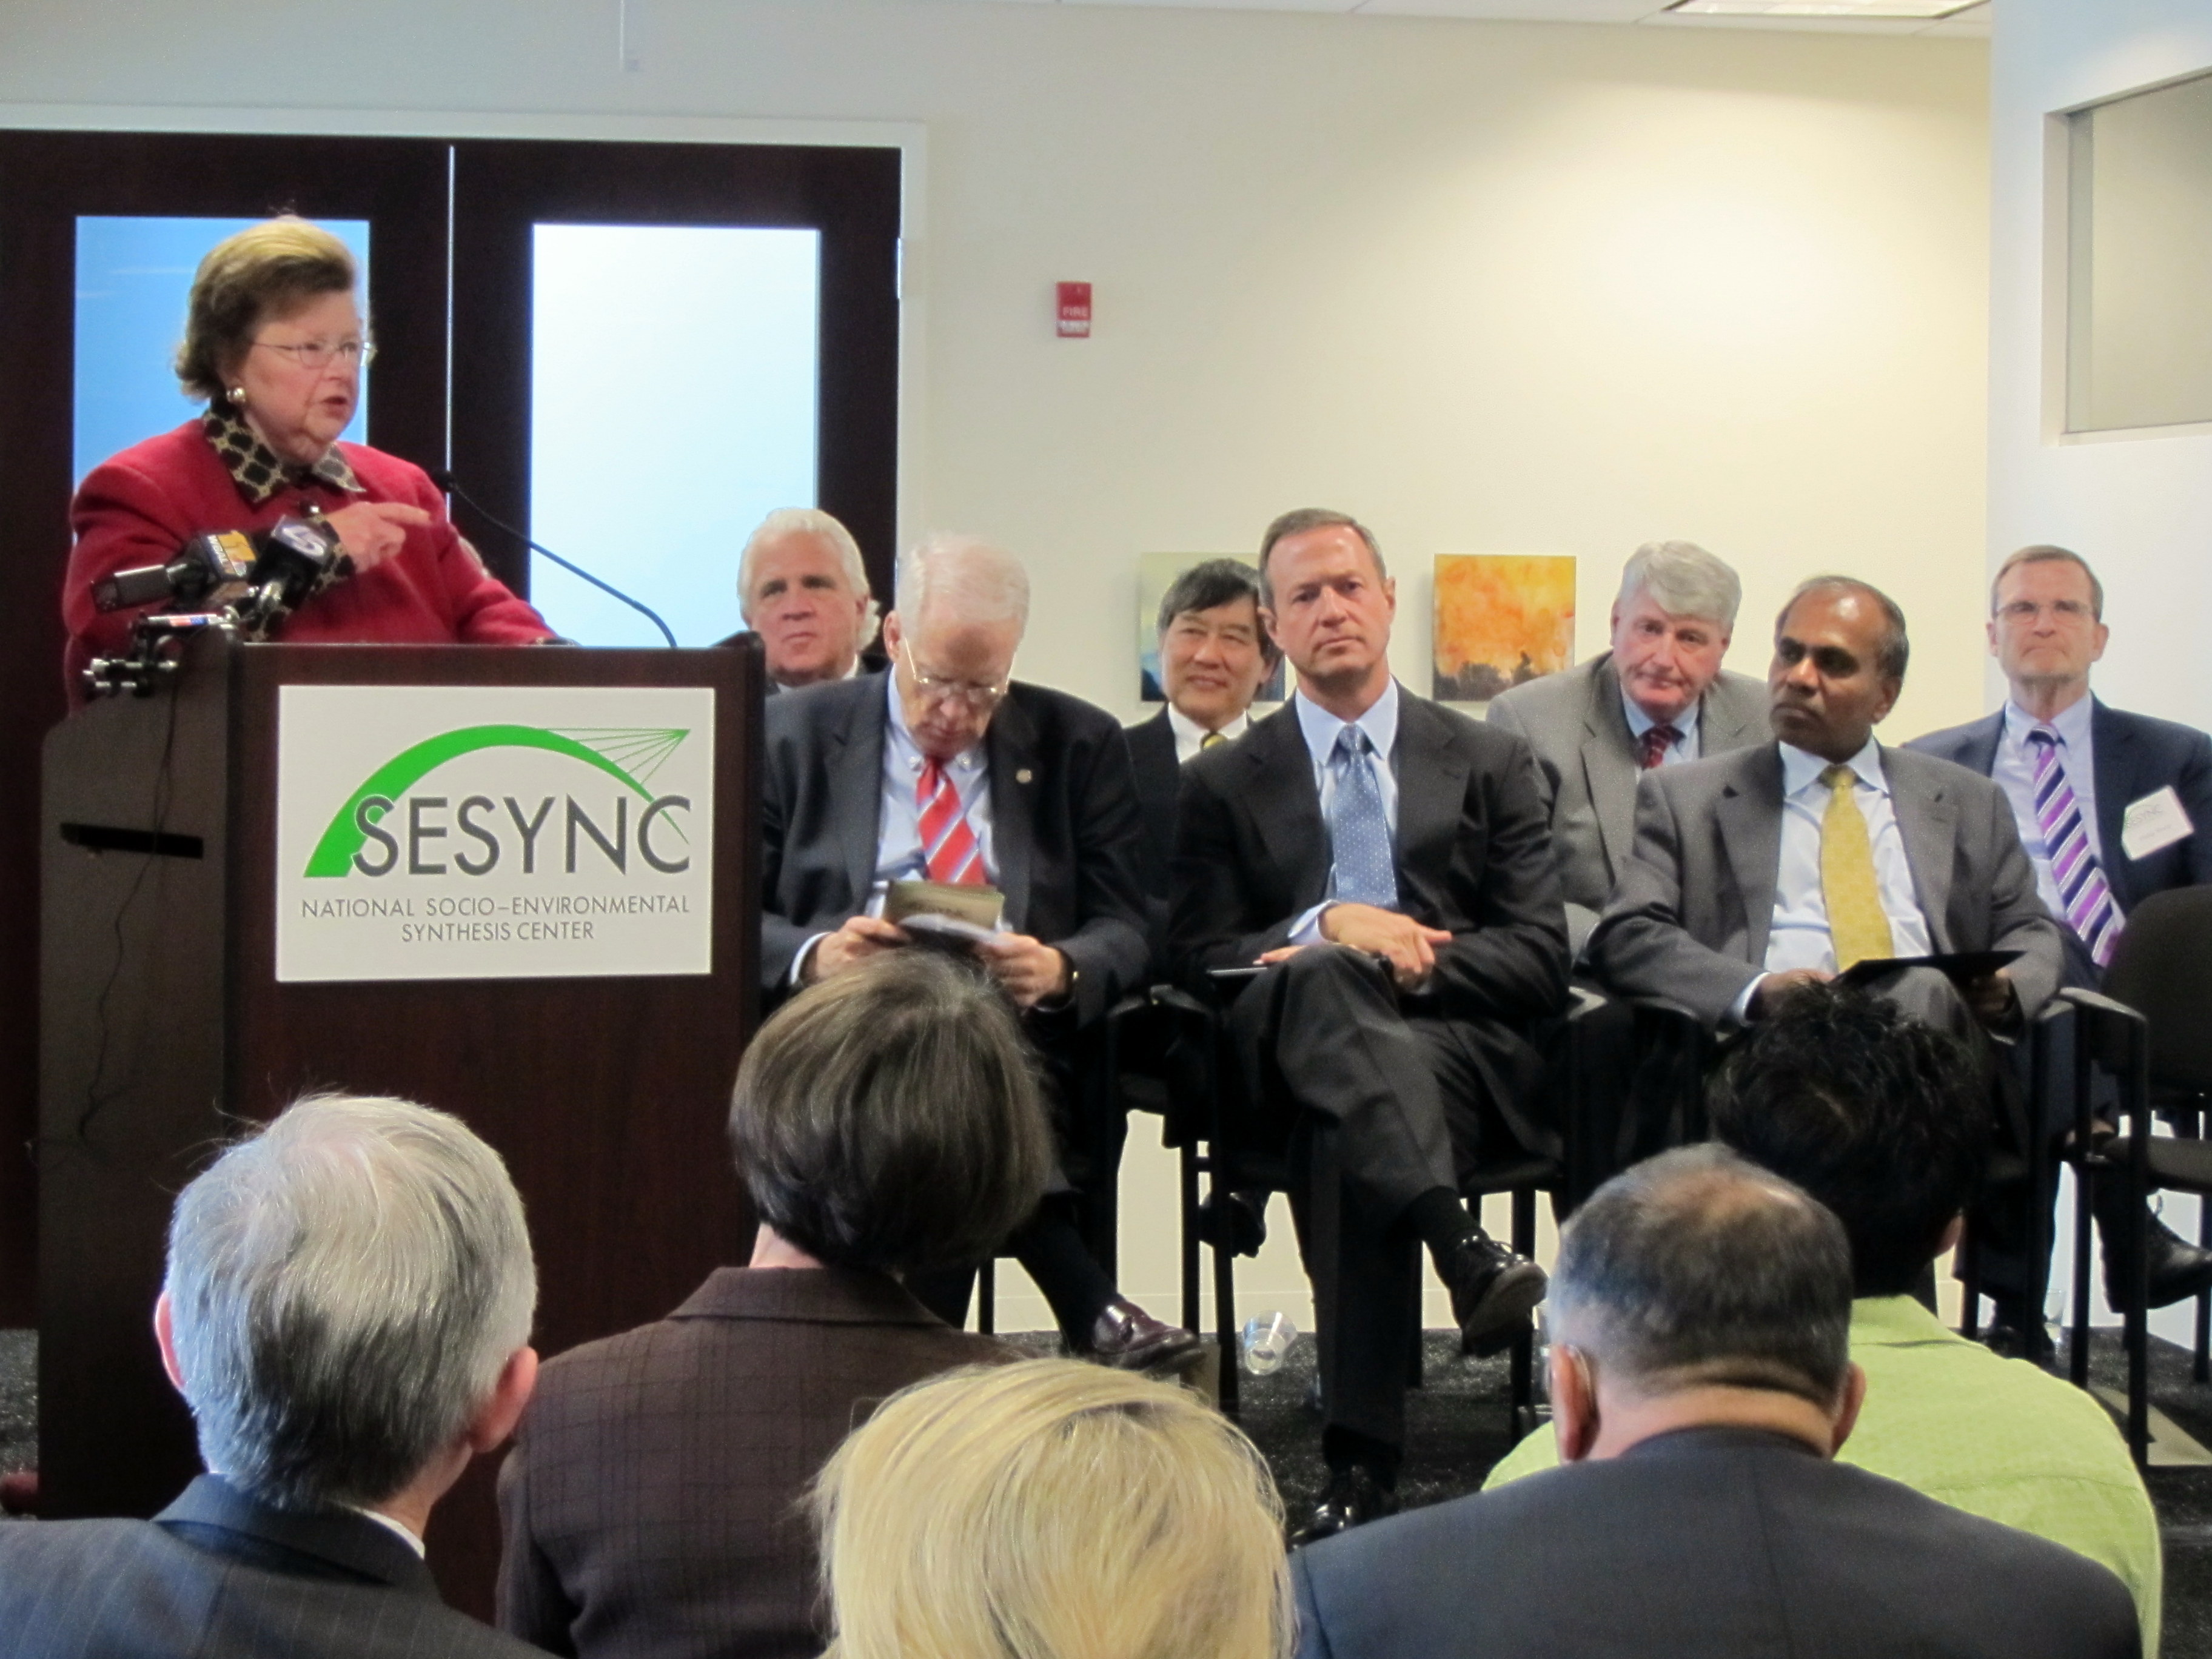 Mikulski Unveils Cutting-Edge Environmental Research and Policy Center